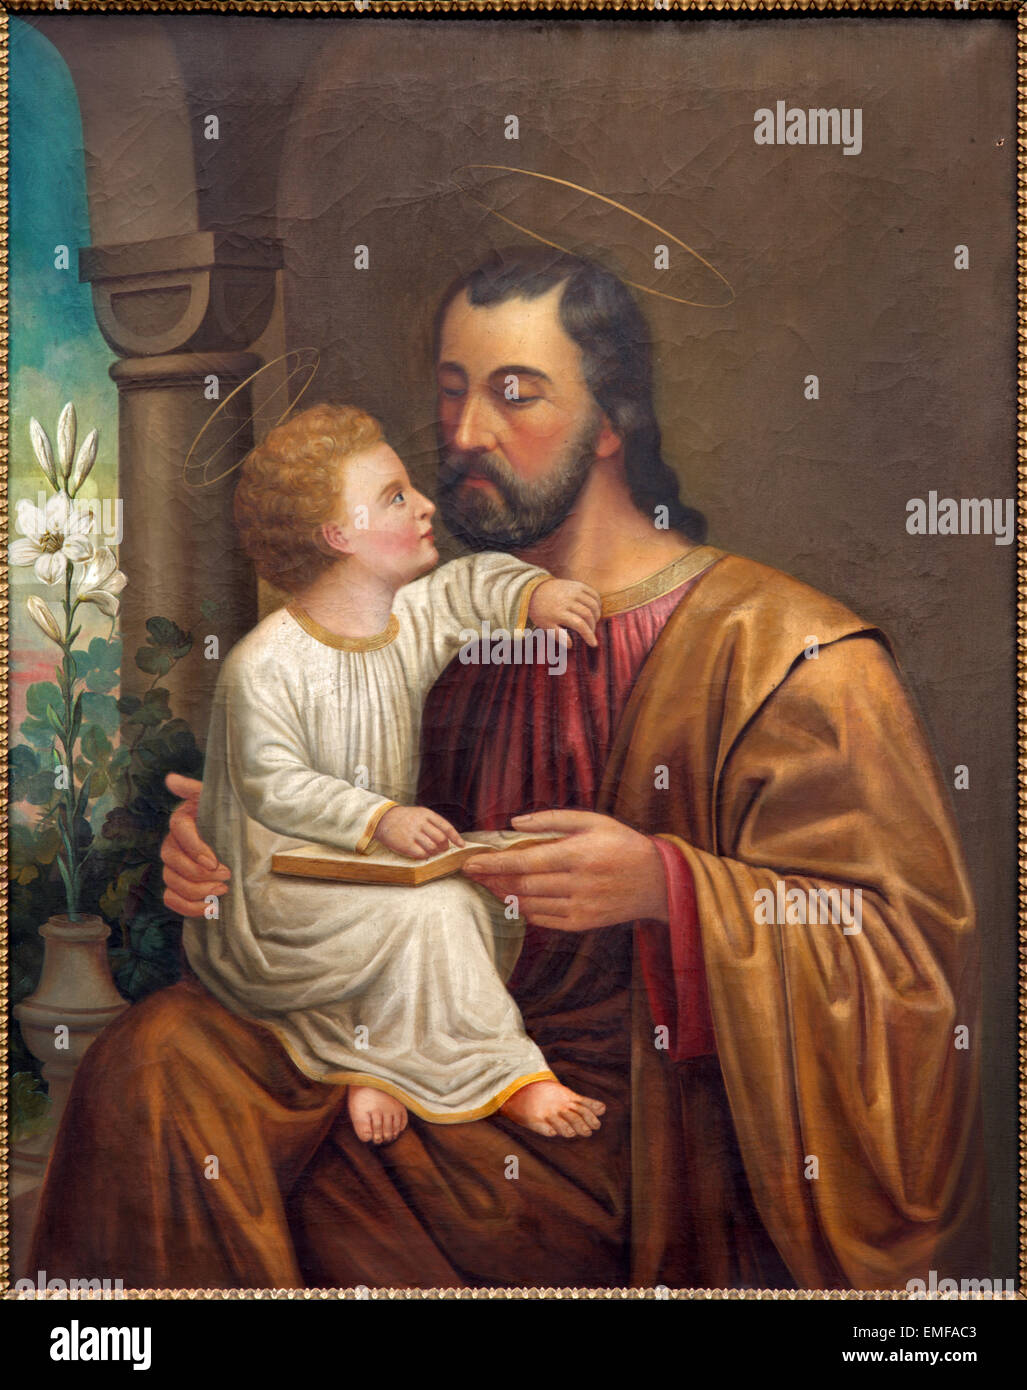 VIENNA, AUSTRIA - DECEMBER 17, 2014: The St. Joseph paint on the side altar of Salesianerkirche by unknown artist of 19. cent. Stock Photo